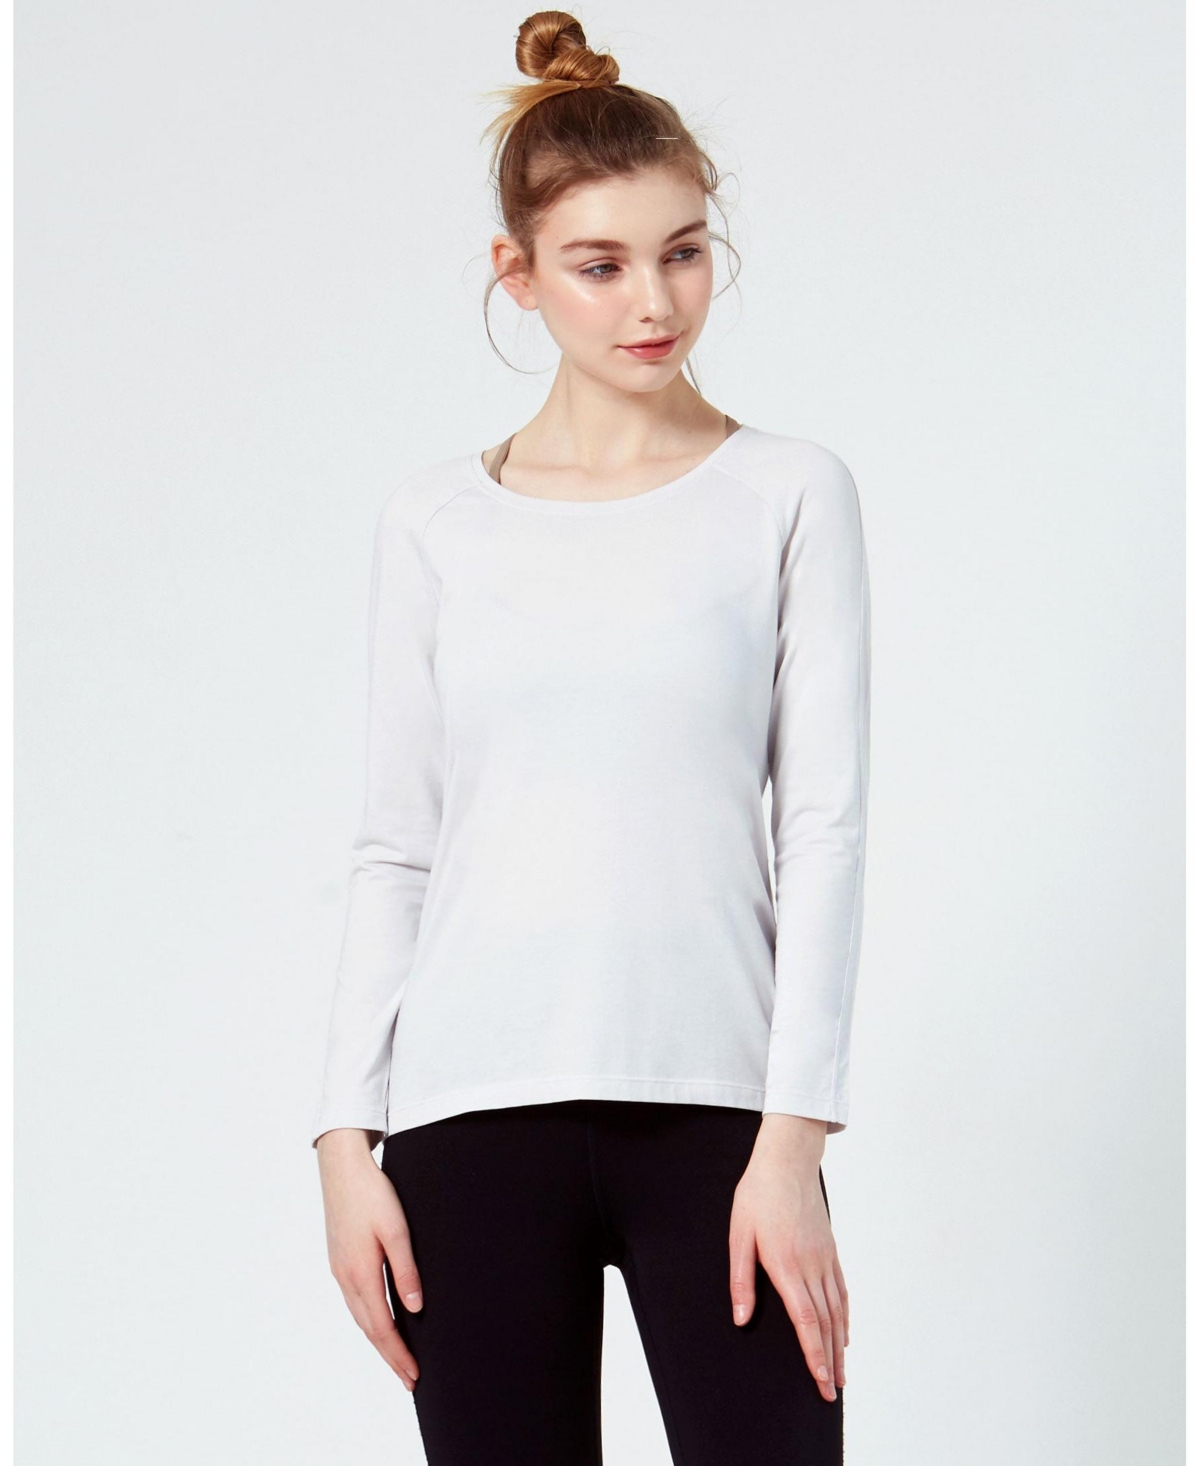 Rebody Essentials Scooped Long Sleeve Top For Women - Stone mauve